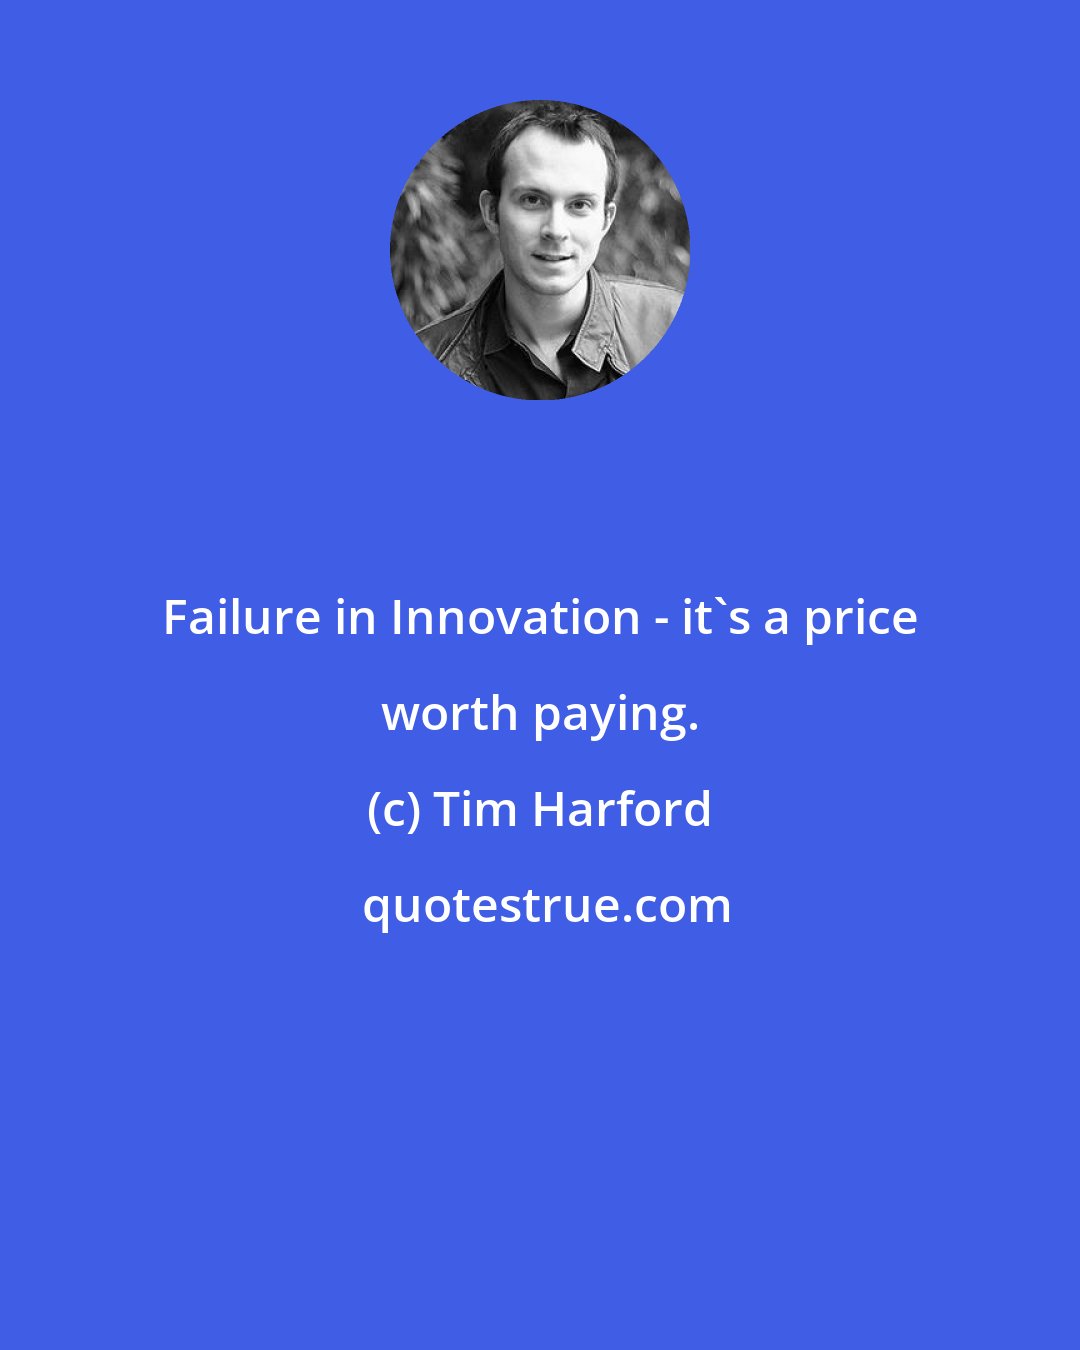 Tim Harford: Failure in Innovation - it's a price worth paying.